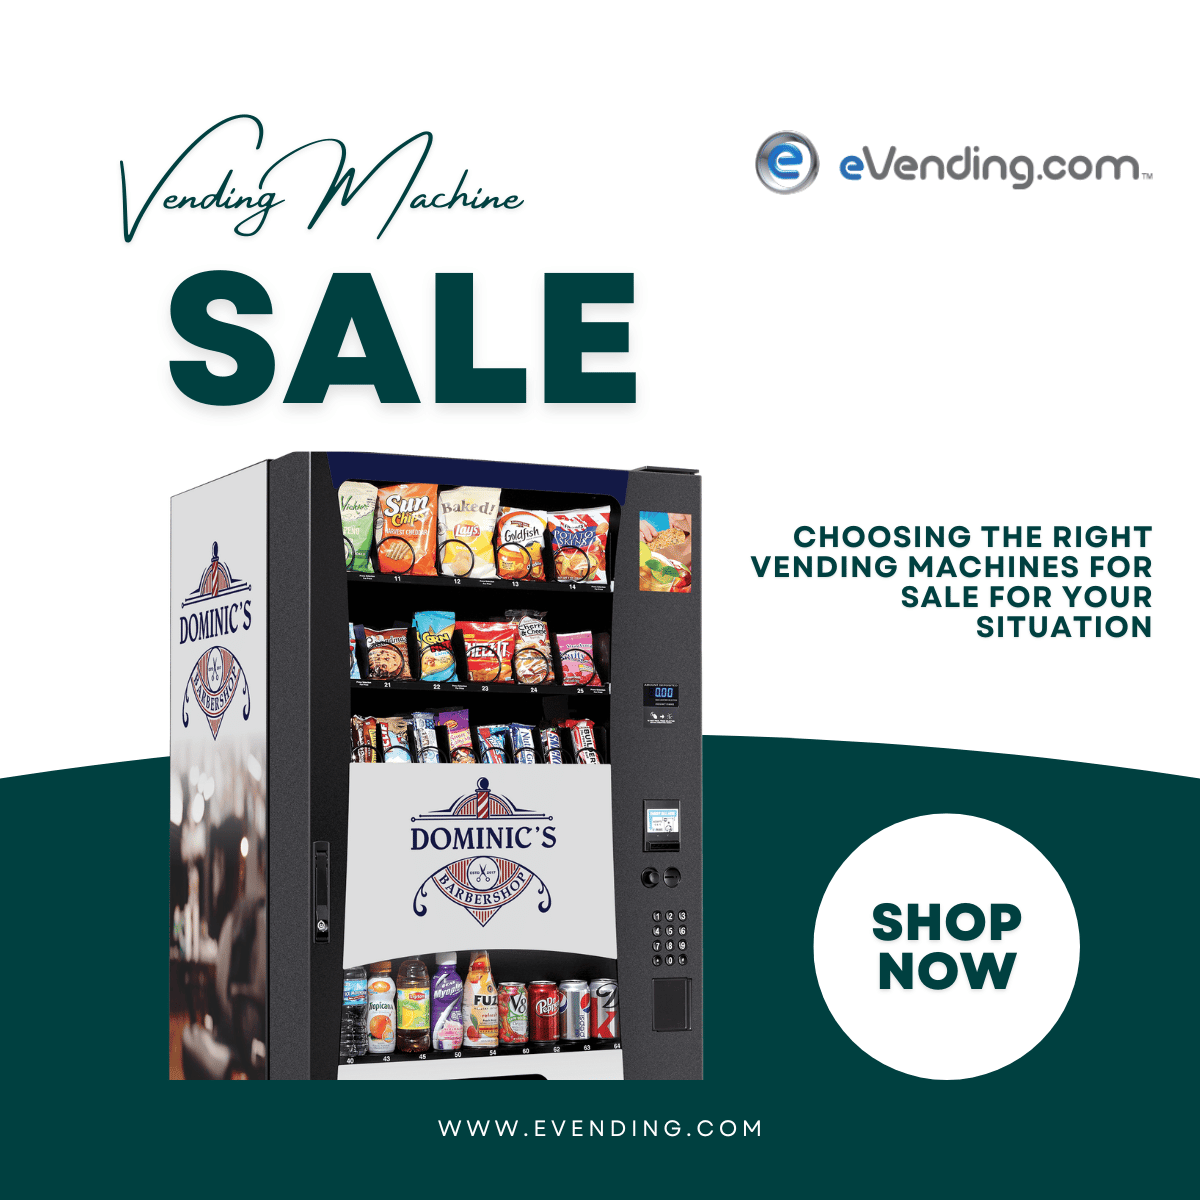 WE OFFER VENDING MACHINE SALES AT ALL PRICES